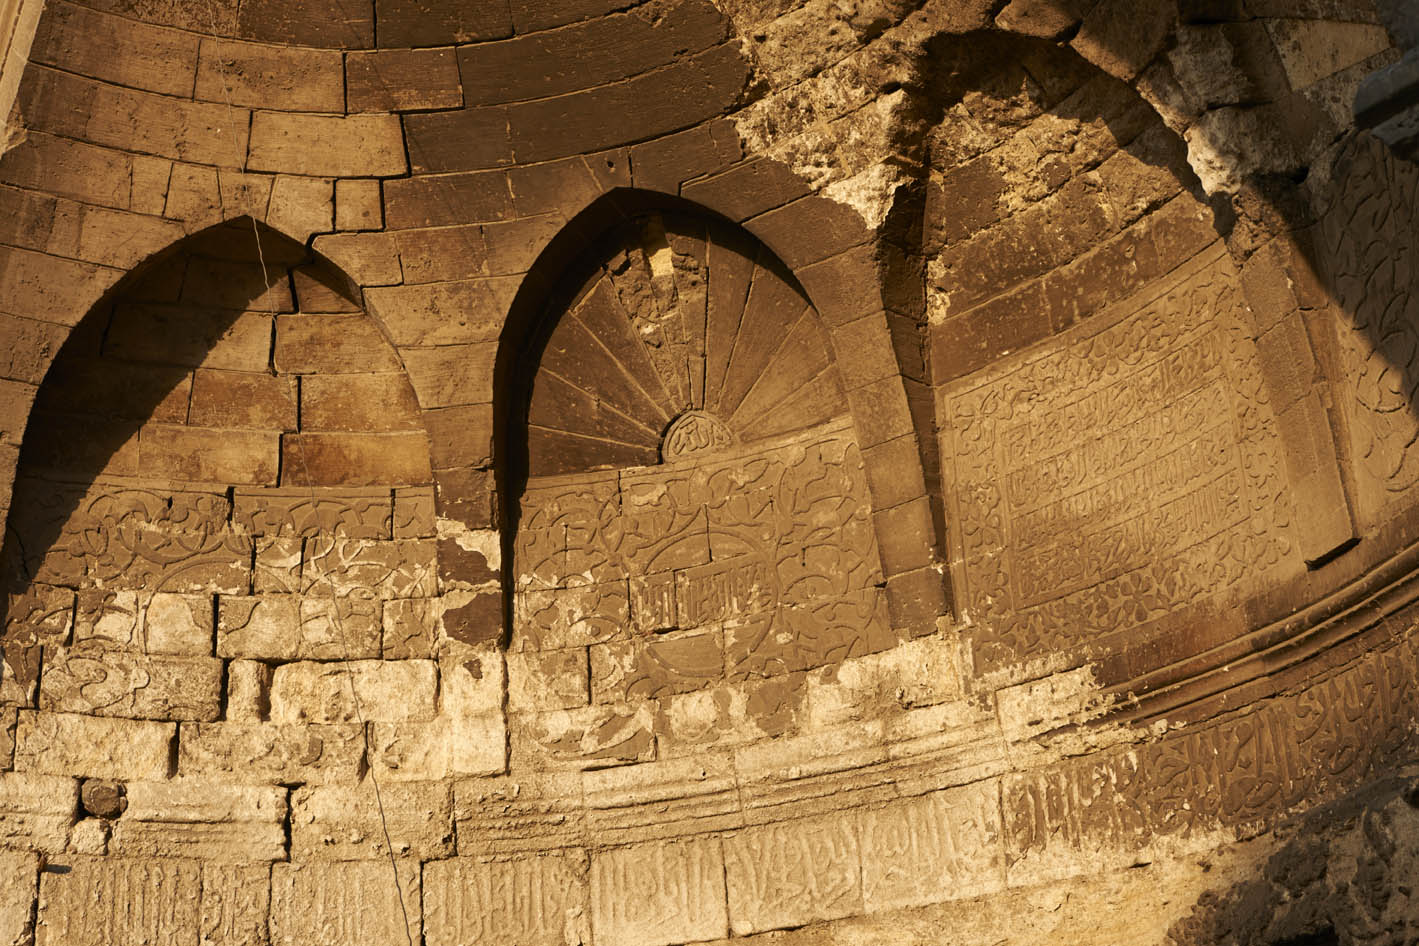 Detail of recesses and inscription band in semi-dome